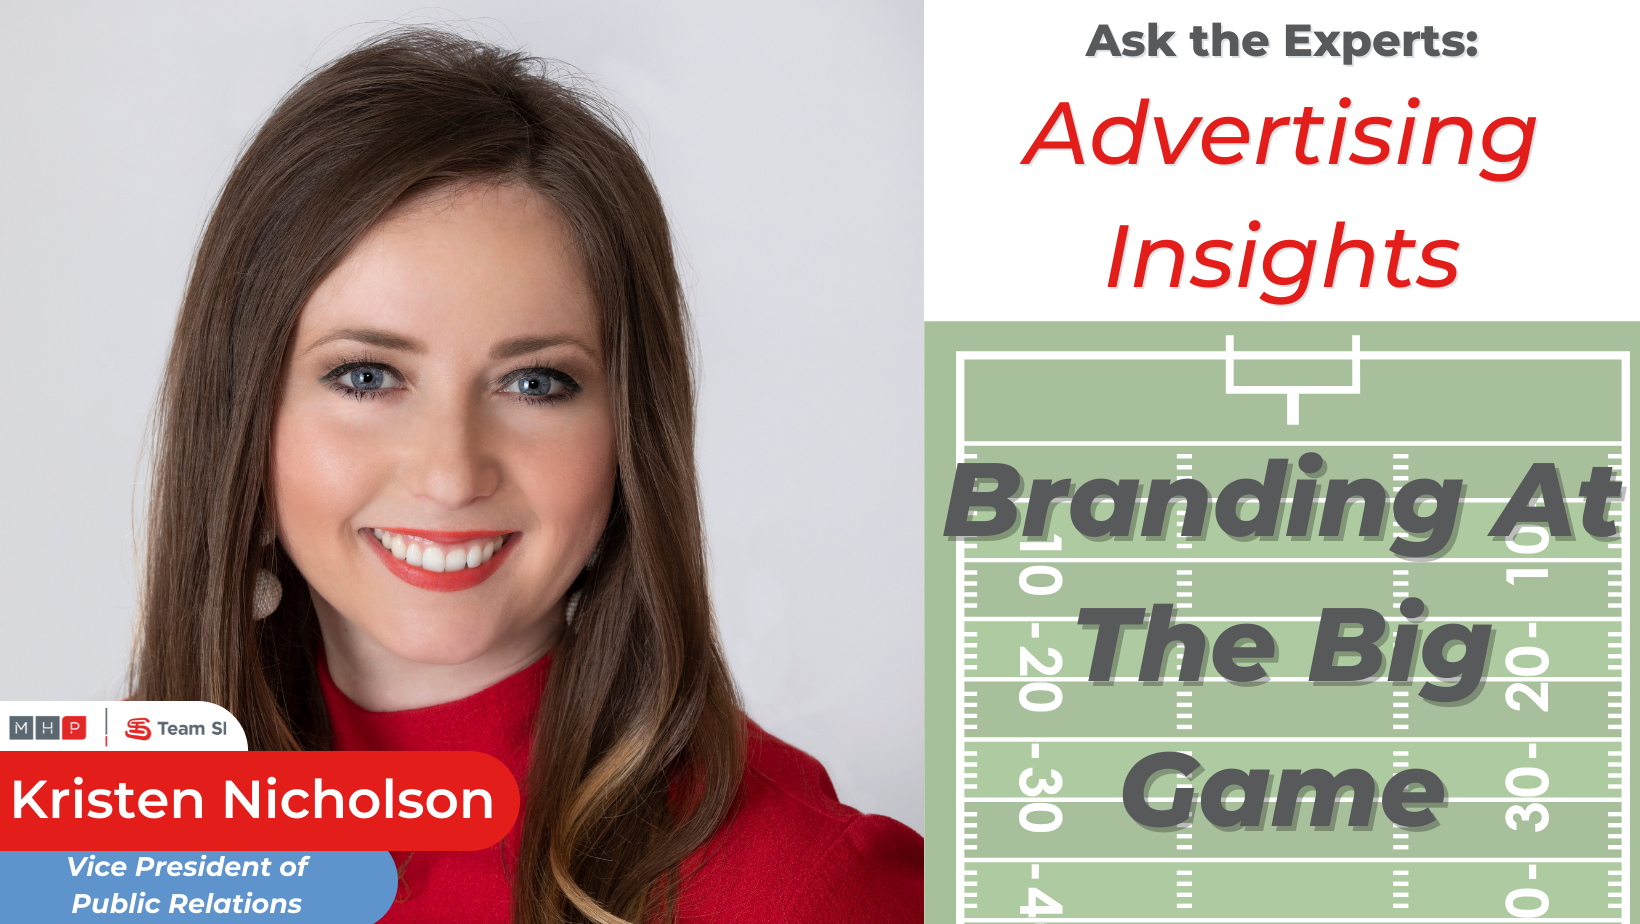 Kristen Nicholson, Vice President of Public Relations, gives her take on branding at the Super Bowl.